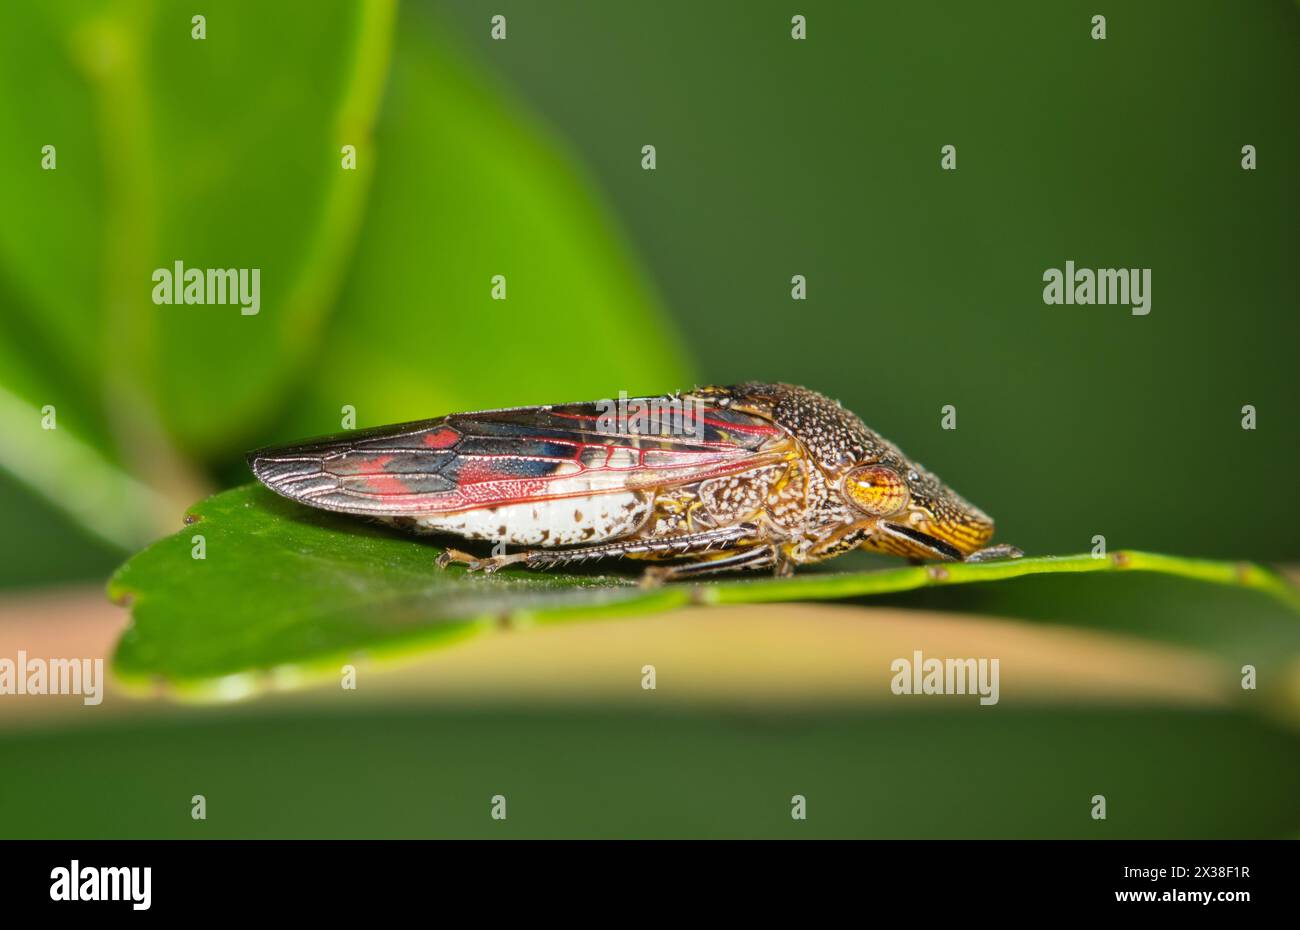 Glassy-winged sharpshooter (Homalodisca vitripennis) on leaf, nature Springtime pest control agriculture. Stock Photo